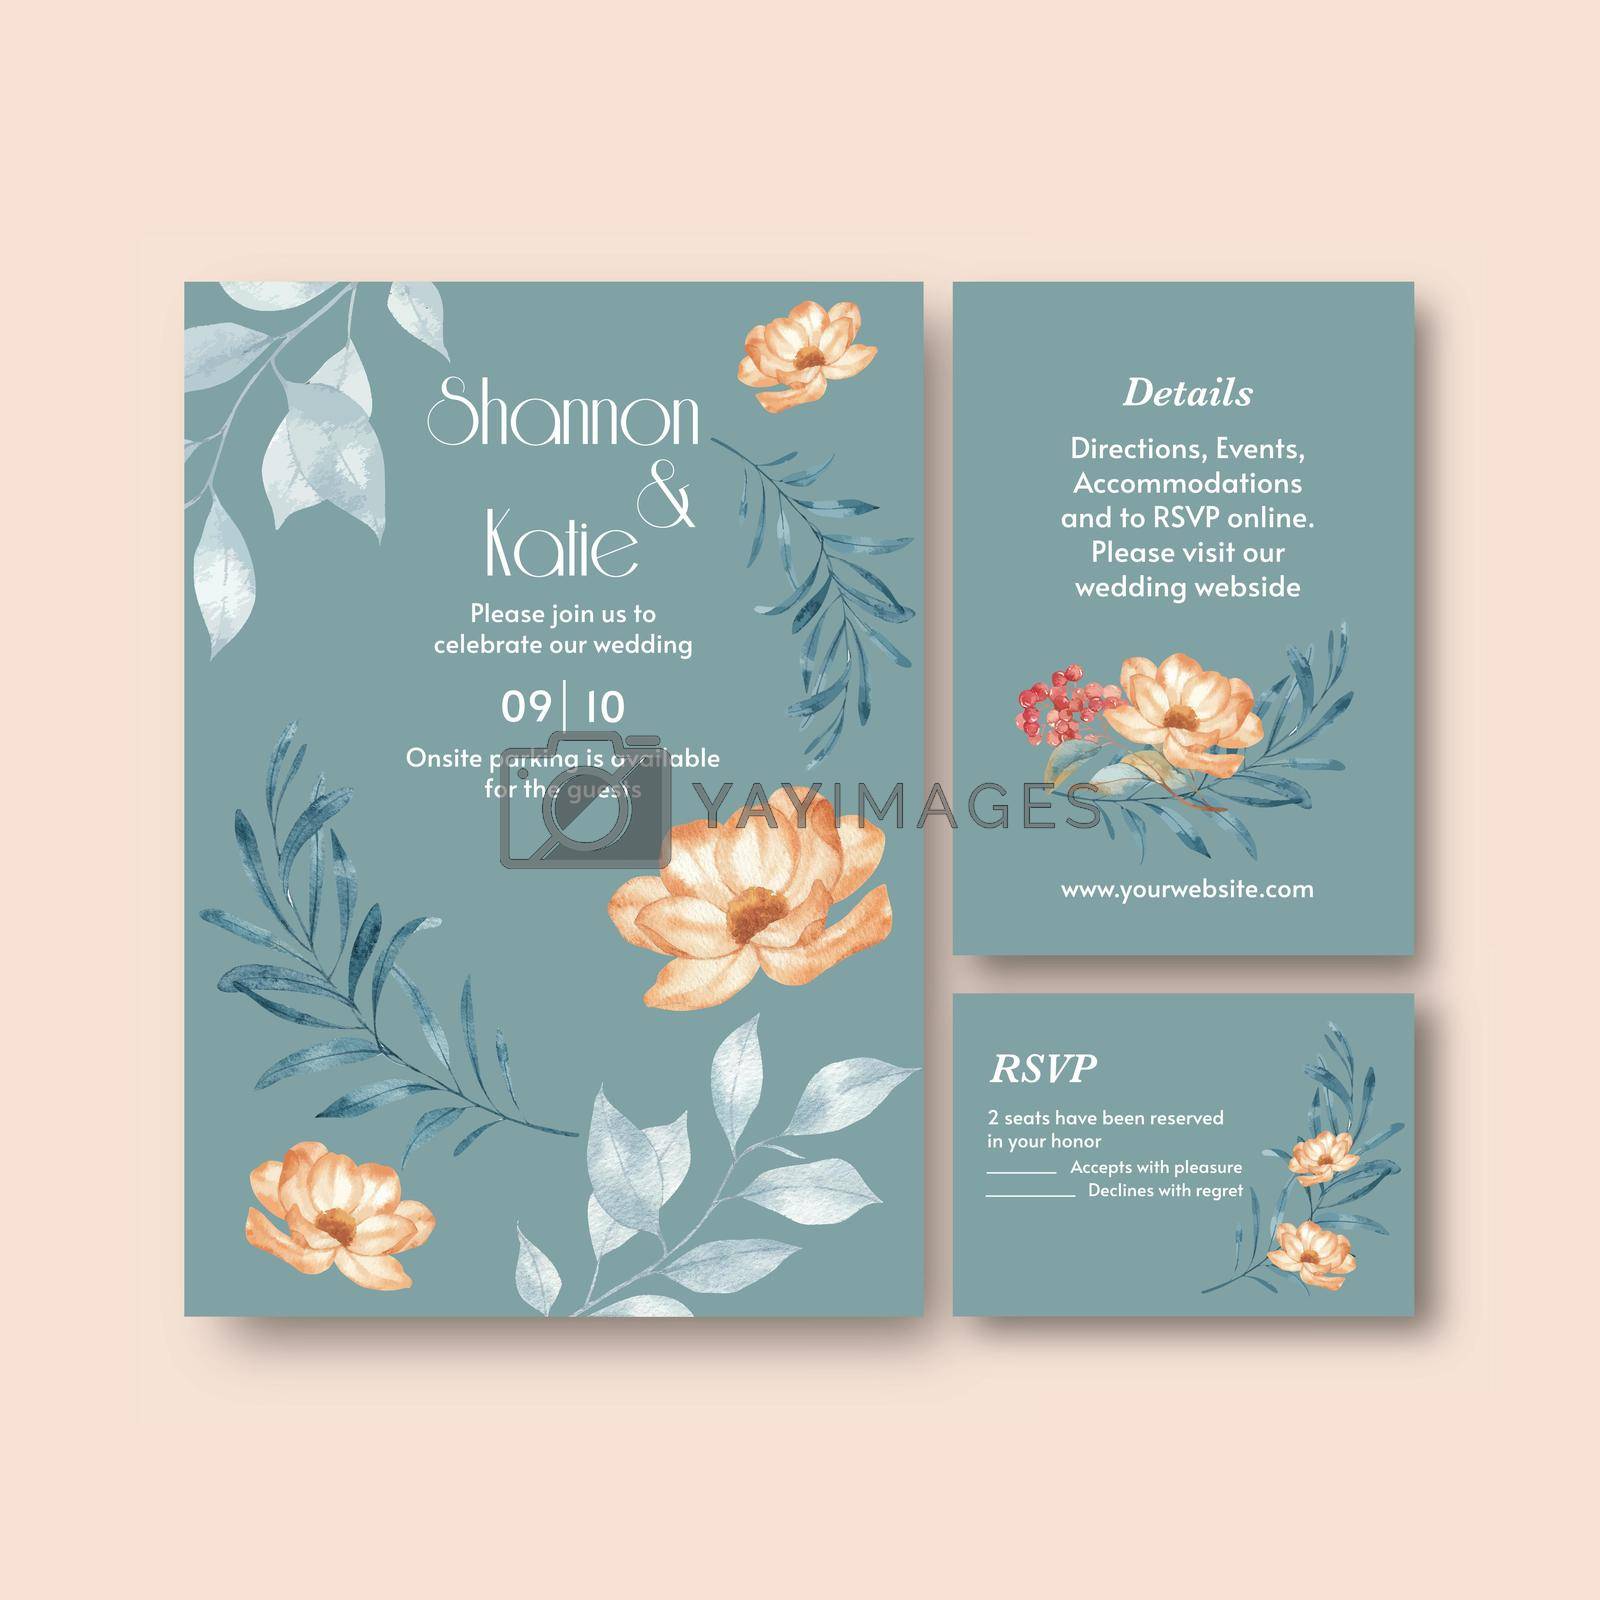 Royalty free image of Wedding card template with rustic fall foliage concept,watercolor style by Photographeeasia